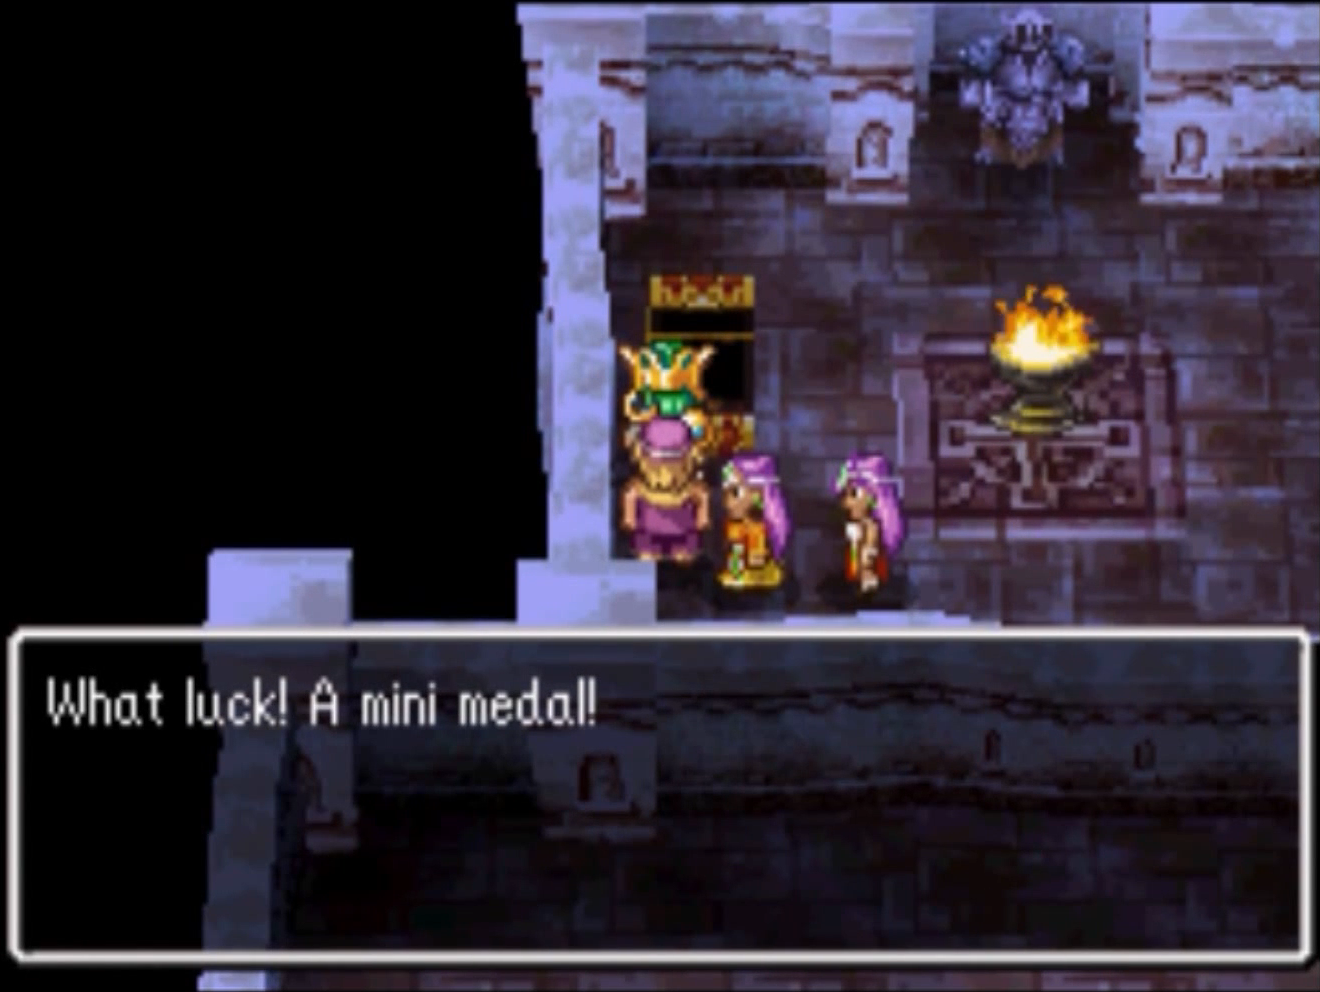 Find both chests and then go up to the next floor (2) | Dragon Quest IV